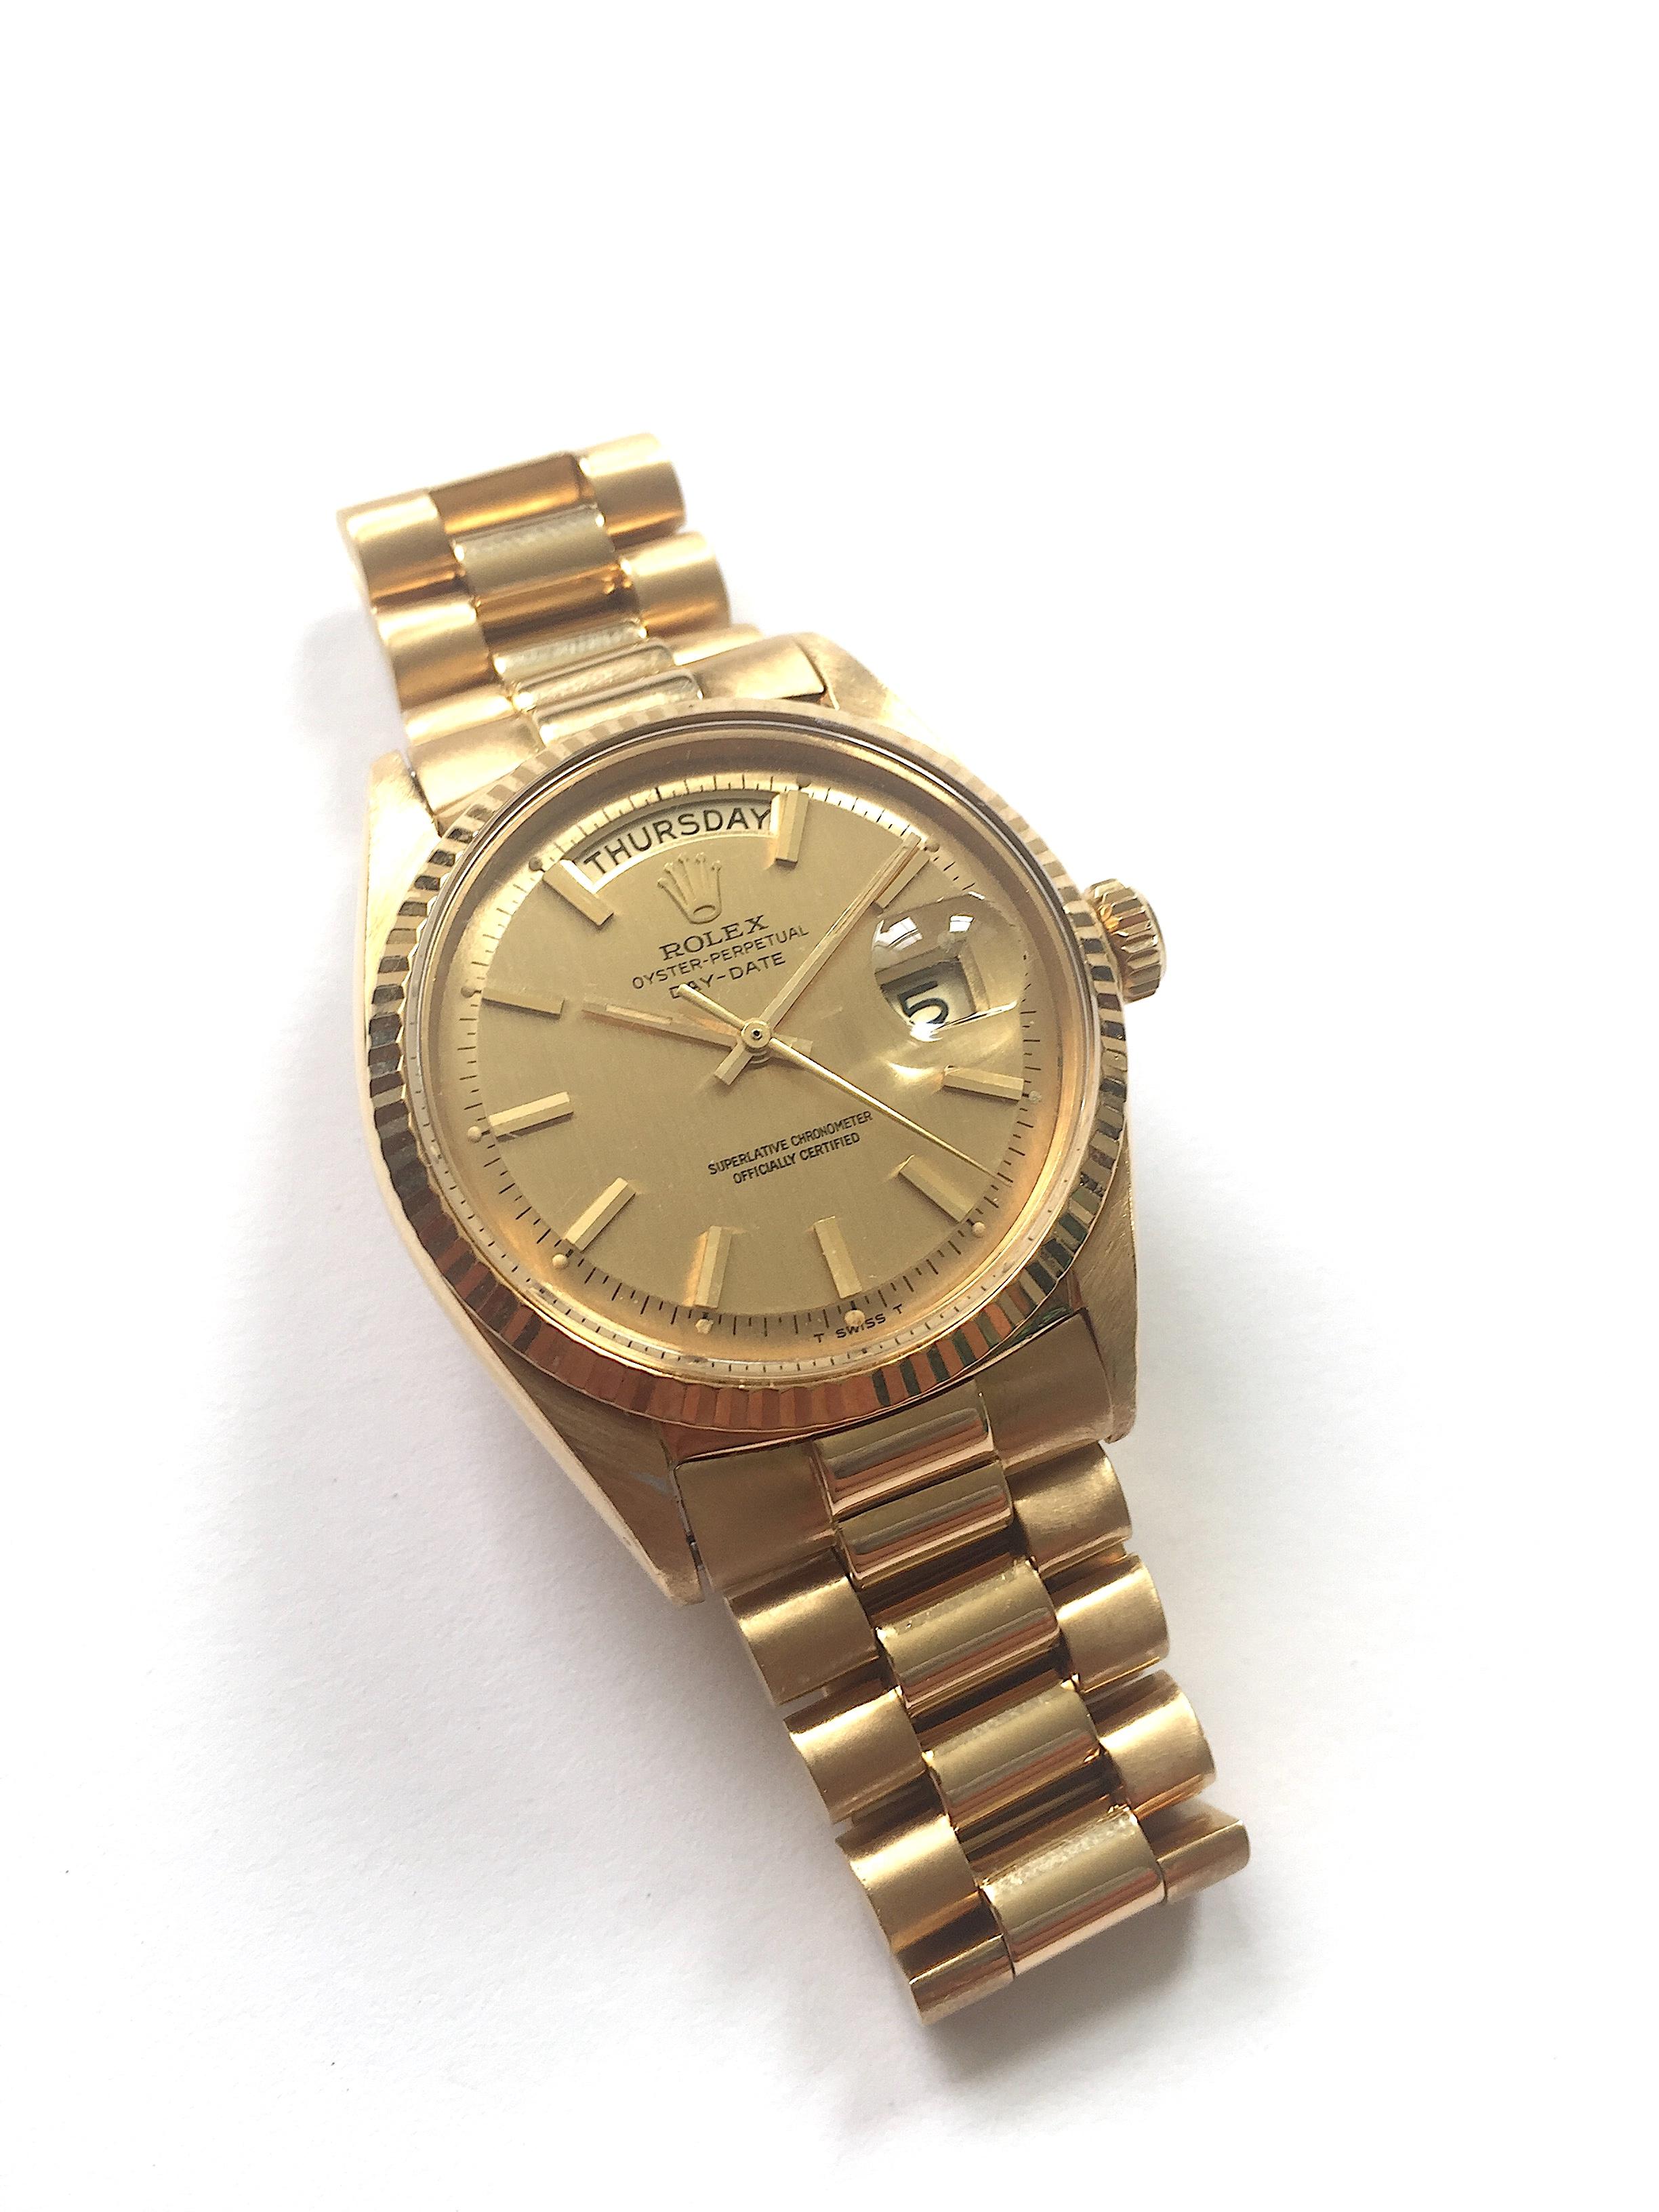 Rolex 18K Yellow Gold Oyster Perpetual Day-Date Automatic Watch
Rare Factory Champagne Shantung Dial
The Shantung Dial name is Derived from The Silk Woven Pattern of The Lines on The Dial.
Yellow Gold Gold Fluted Bezel
18K Yellow Gold Case
36mm in